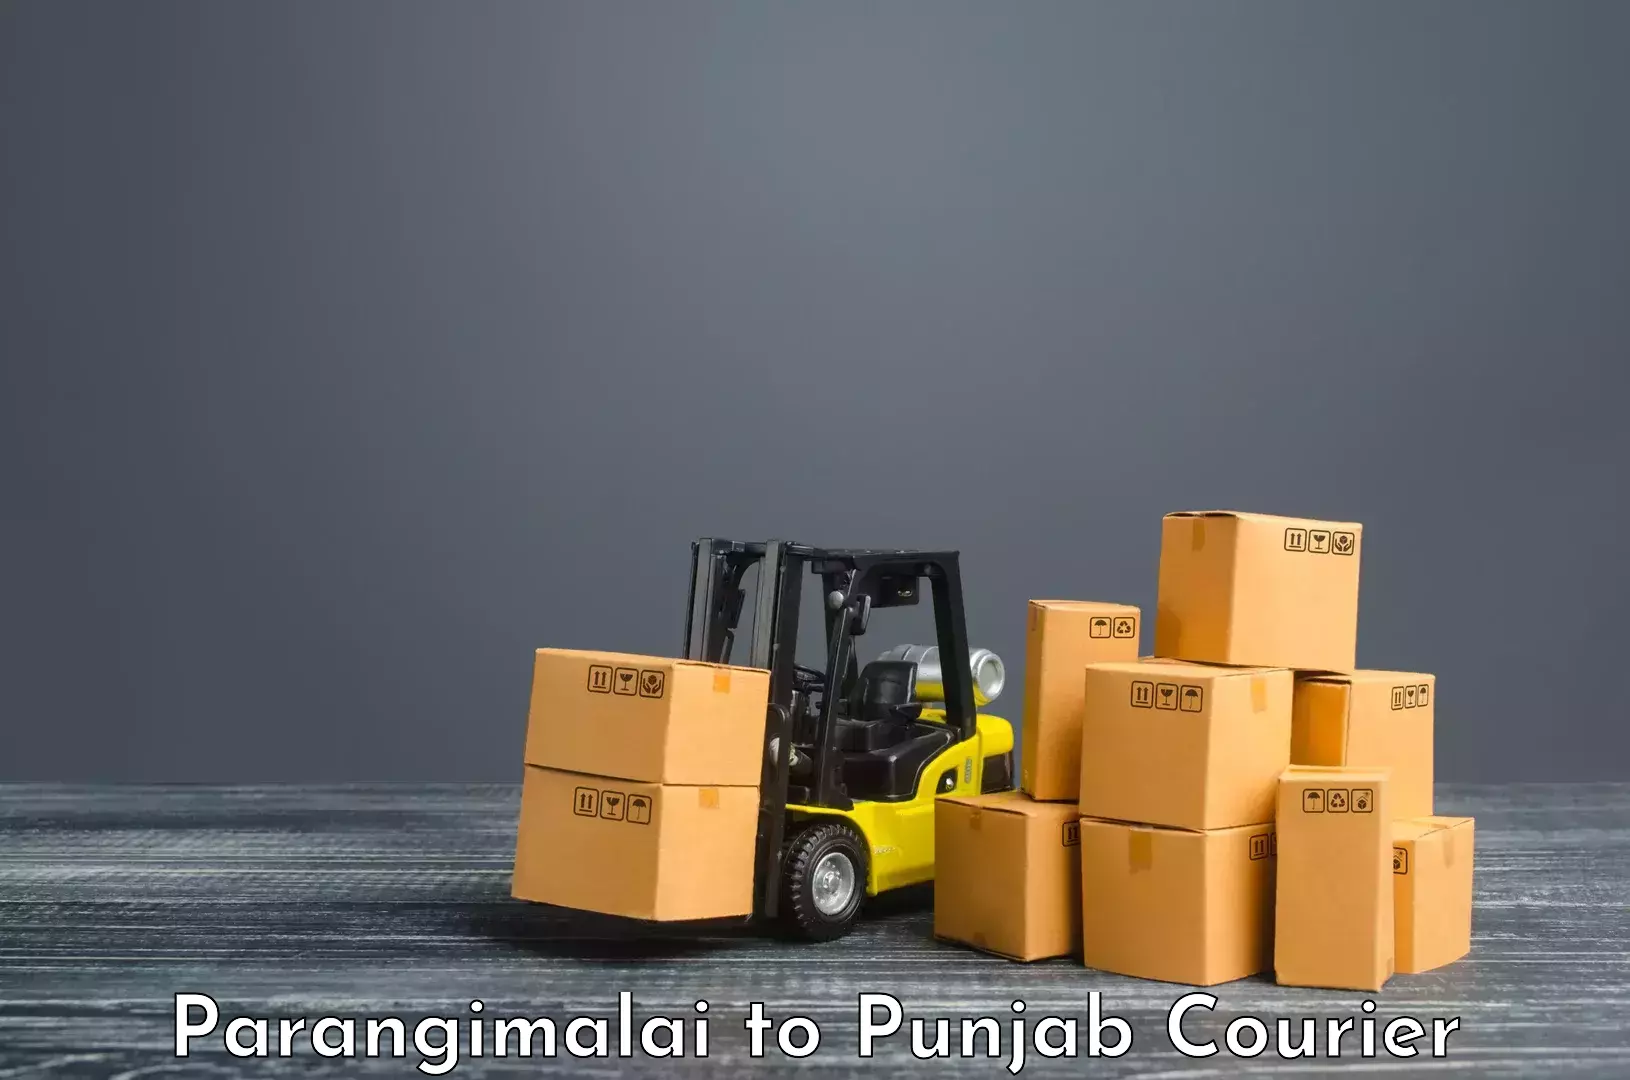 Next-day delivery options Parangimalai to Sirhind Fatehgarh